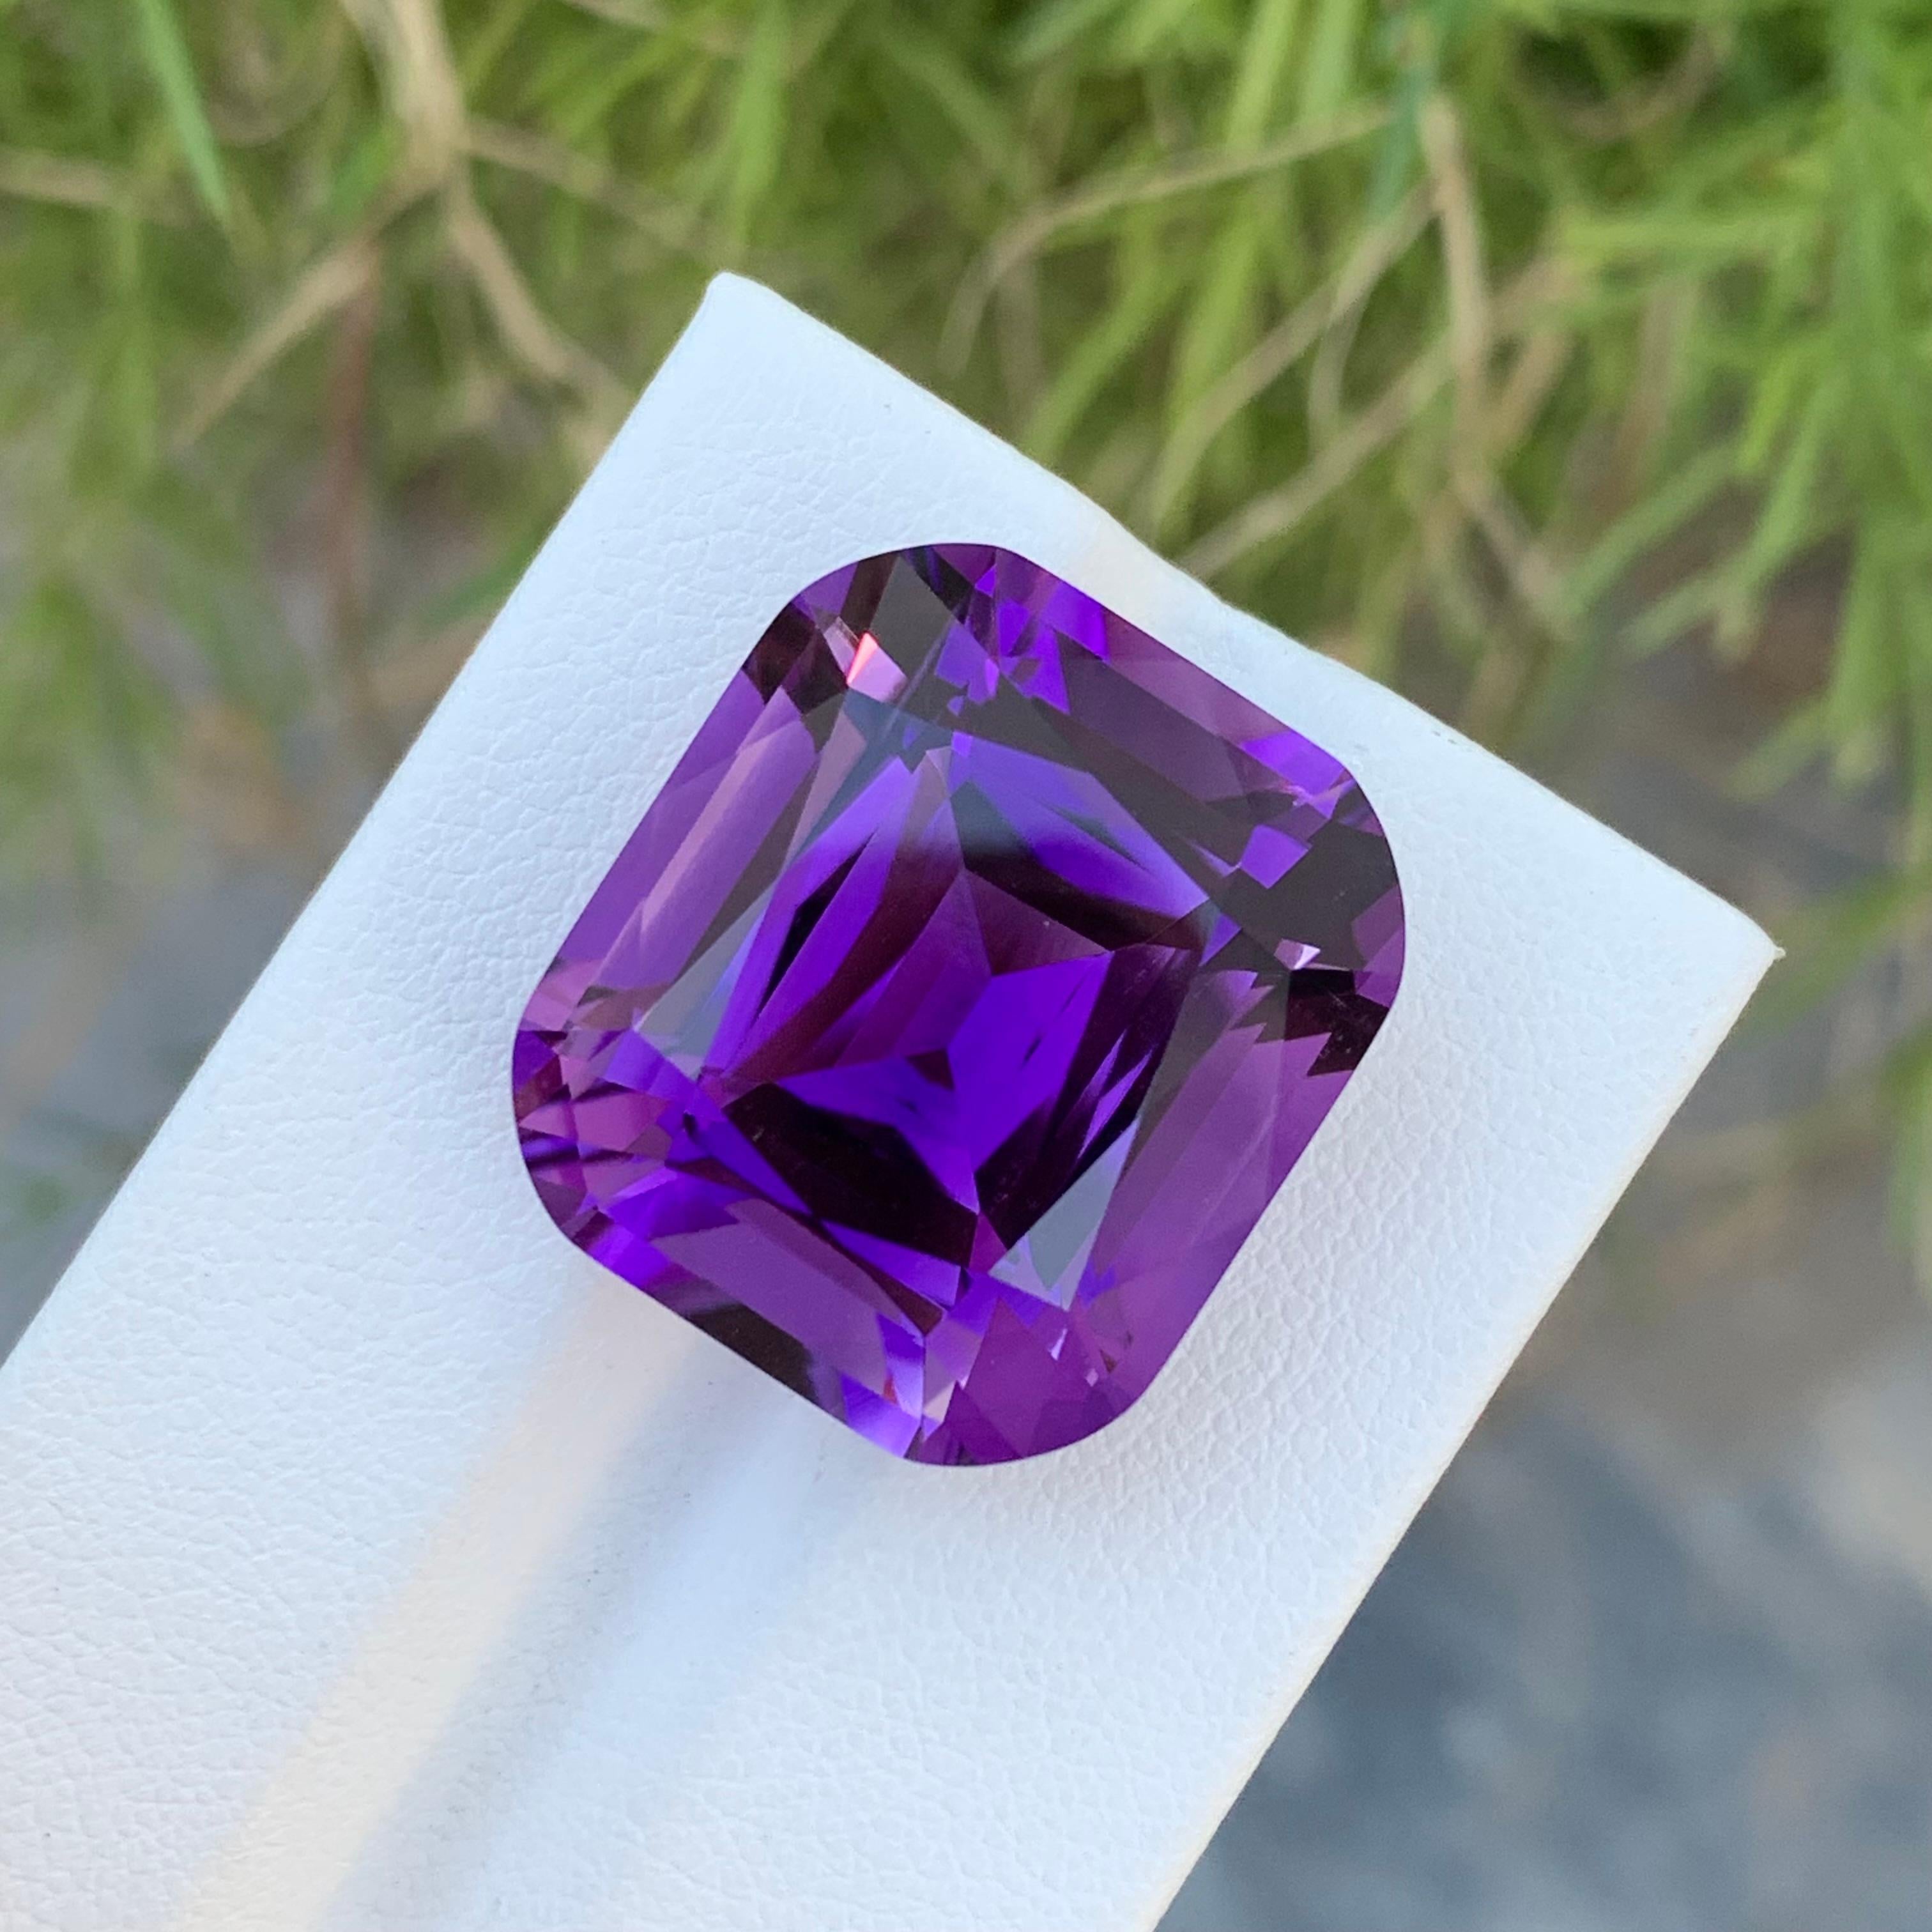 Loose Amethyst 
Weight: 31.30 Carats 
Dimension: 20.1 x 18.8 x 13.2 Mm
Origin: Brazil 
Treatment: Non 
Certificate: On Demand 
Shape: Long Cushion 

Amethyst, a resplendent purple variety of quartz, has captivated humanity for centuries with its